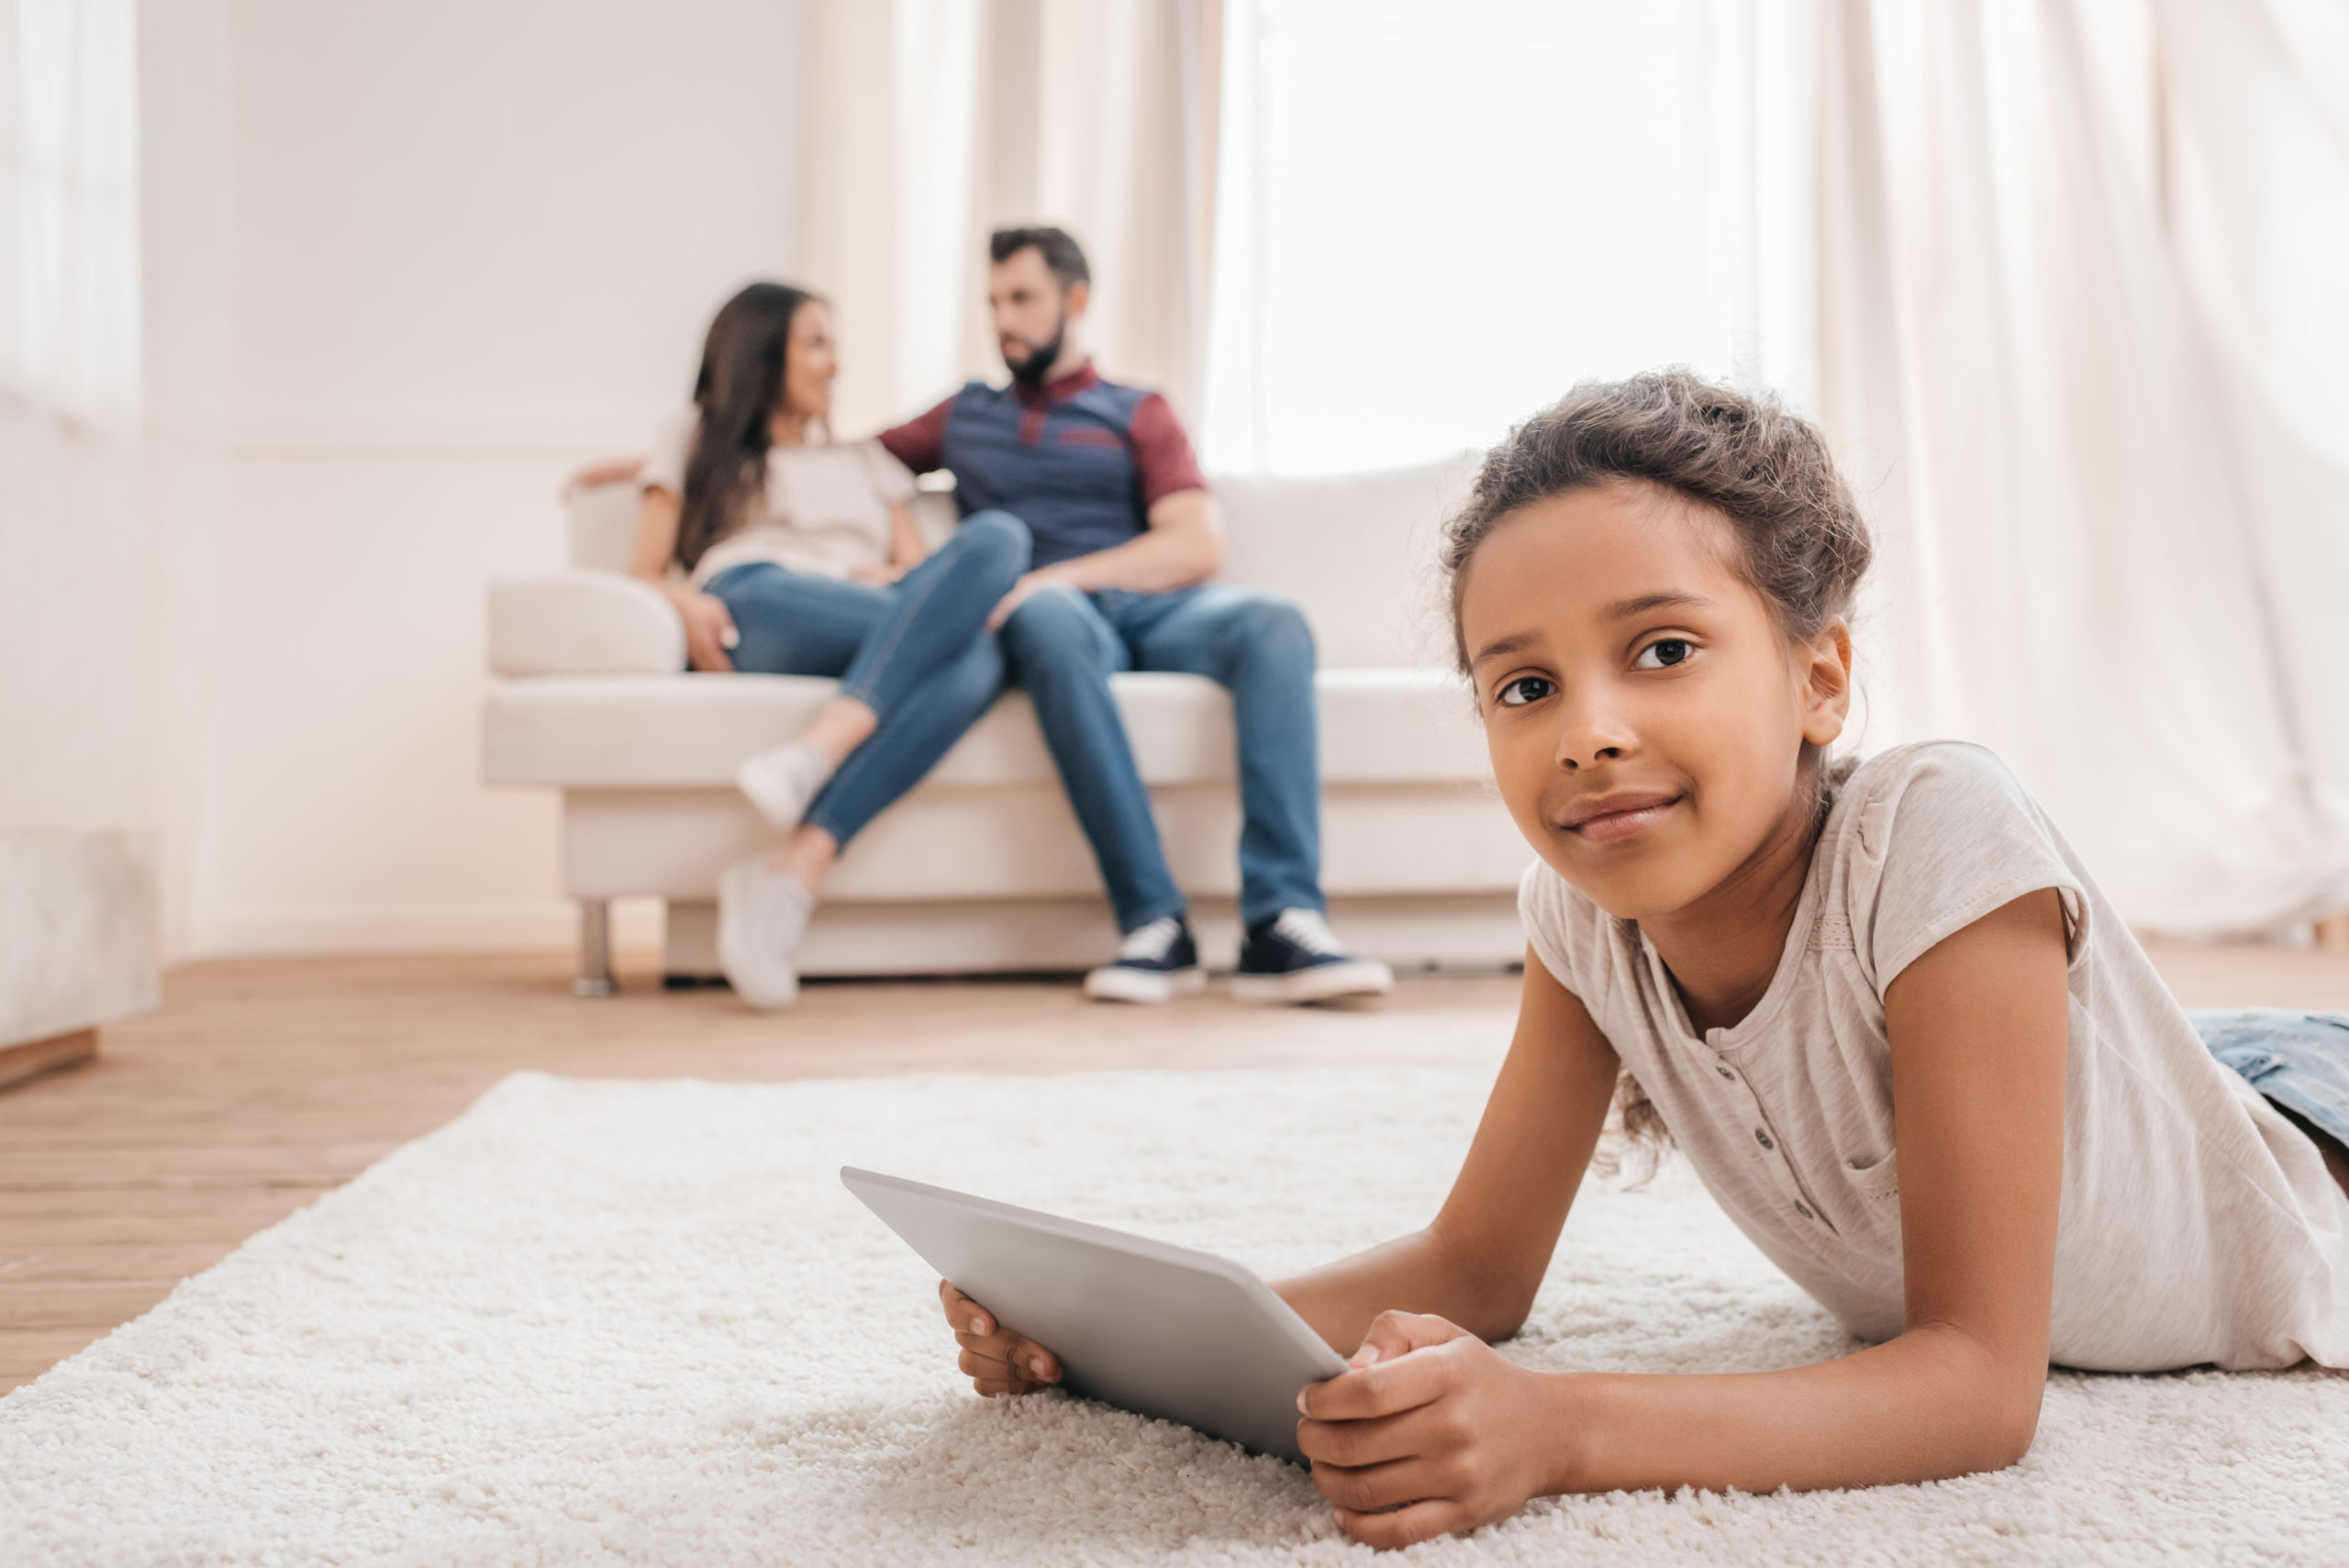 Image of child on a tablet while parents in the background discuss homeschool styles and methods